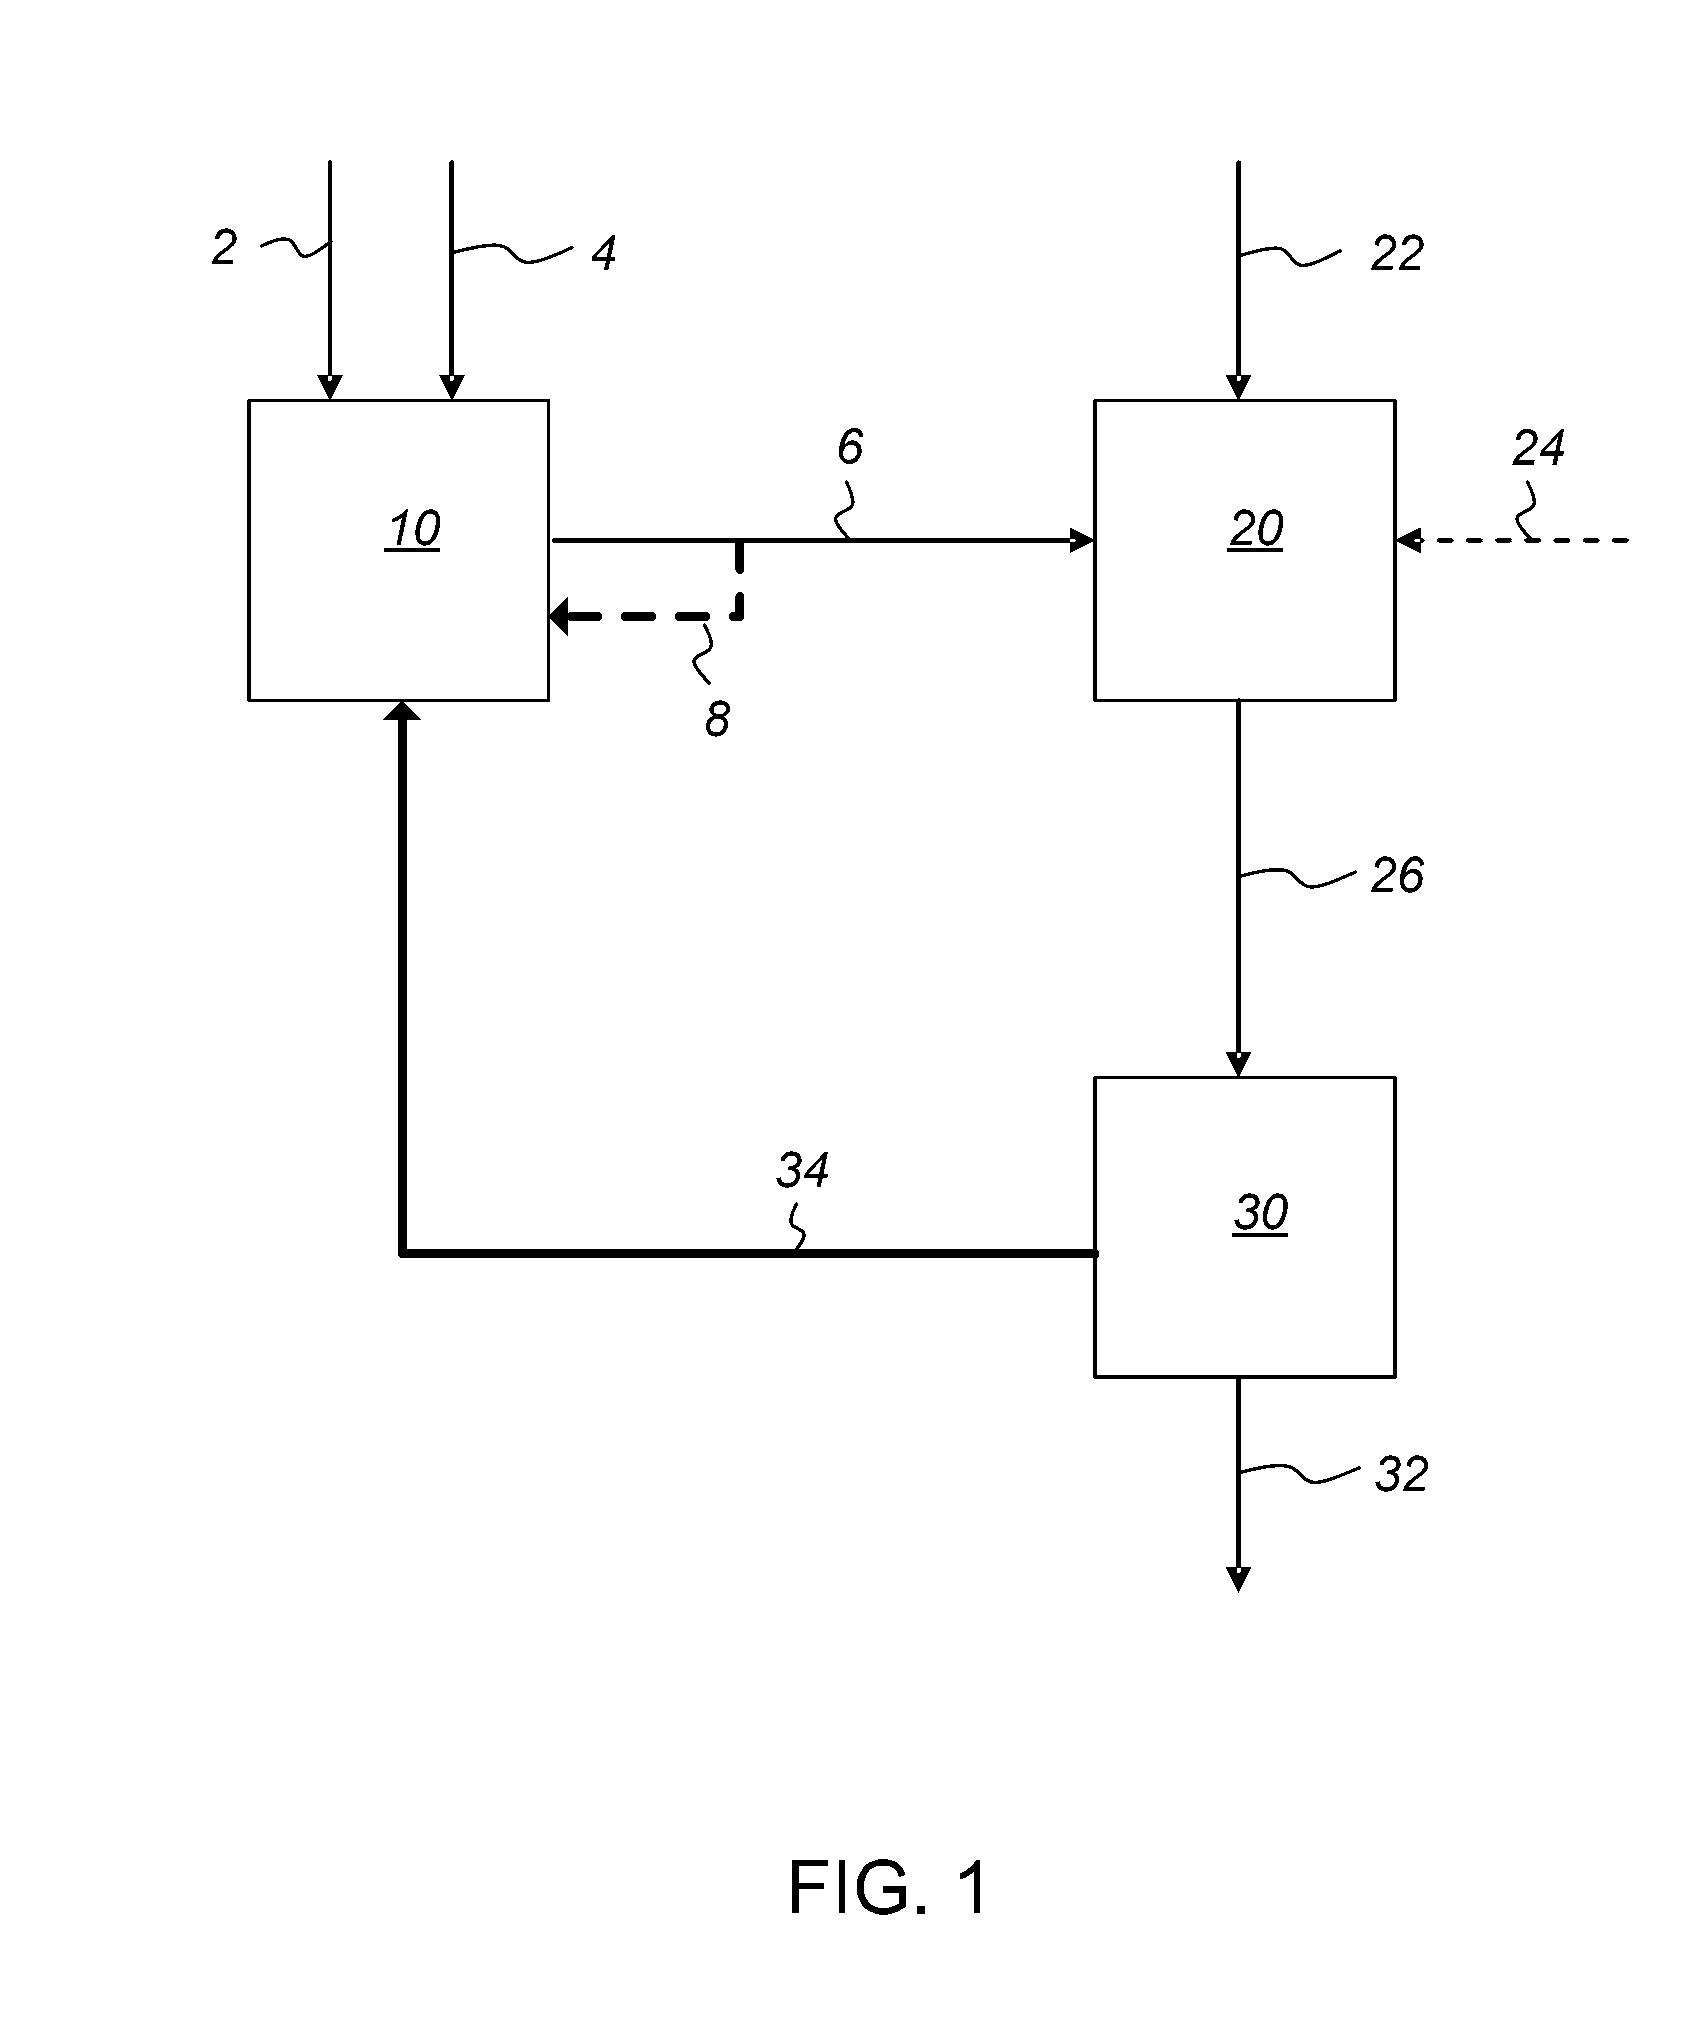 Process for Producing Ethanol by Hydrocarbon Oxidation and Hydrogenation or Hydration